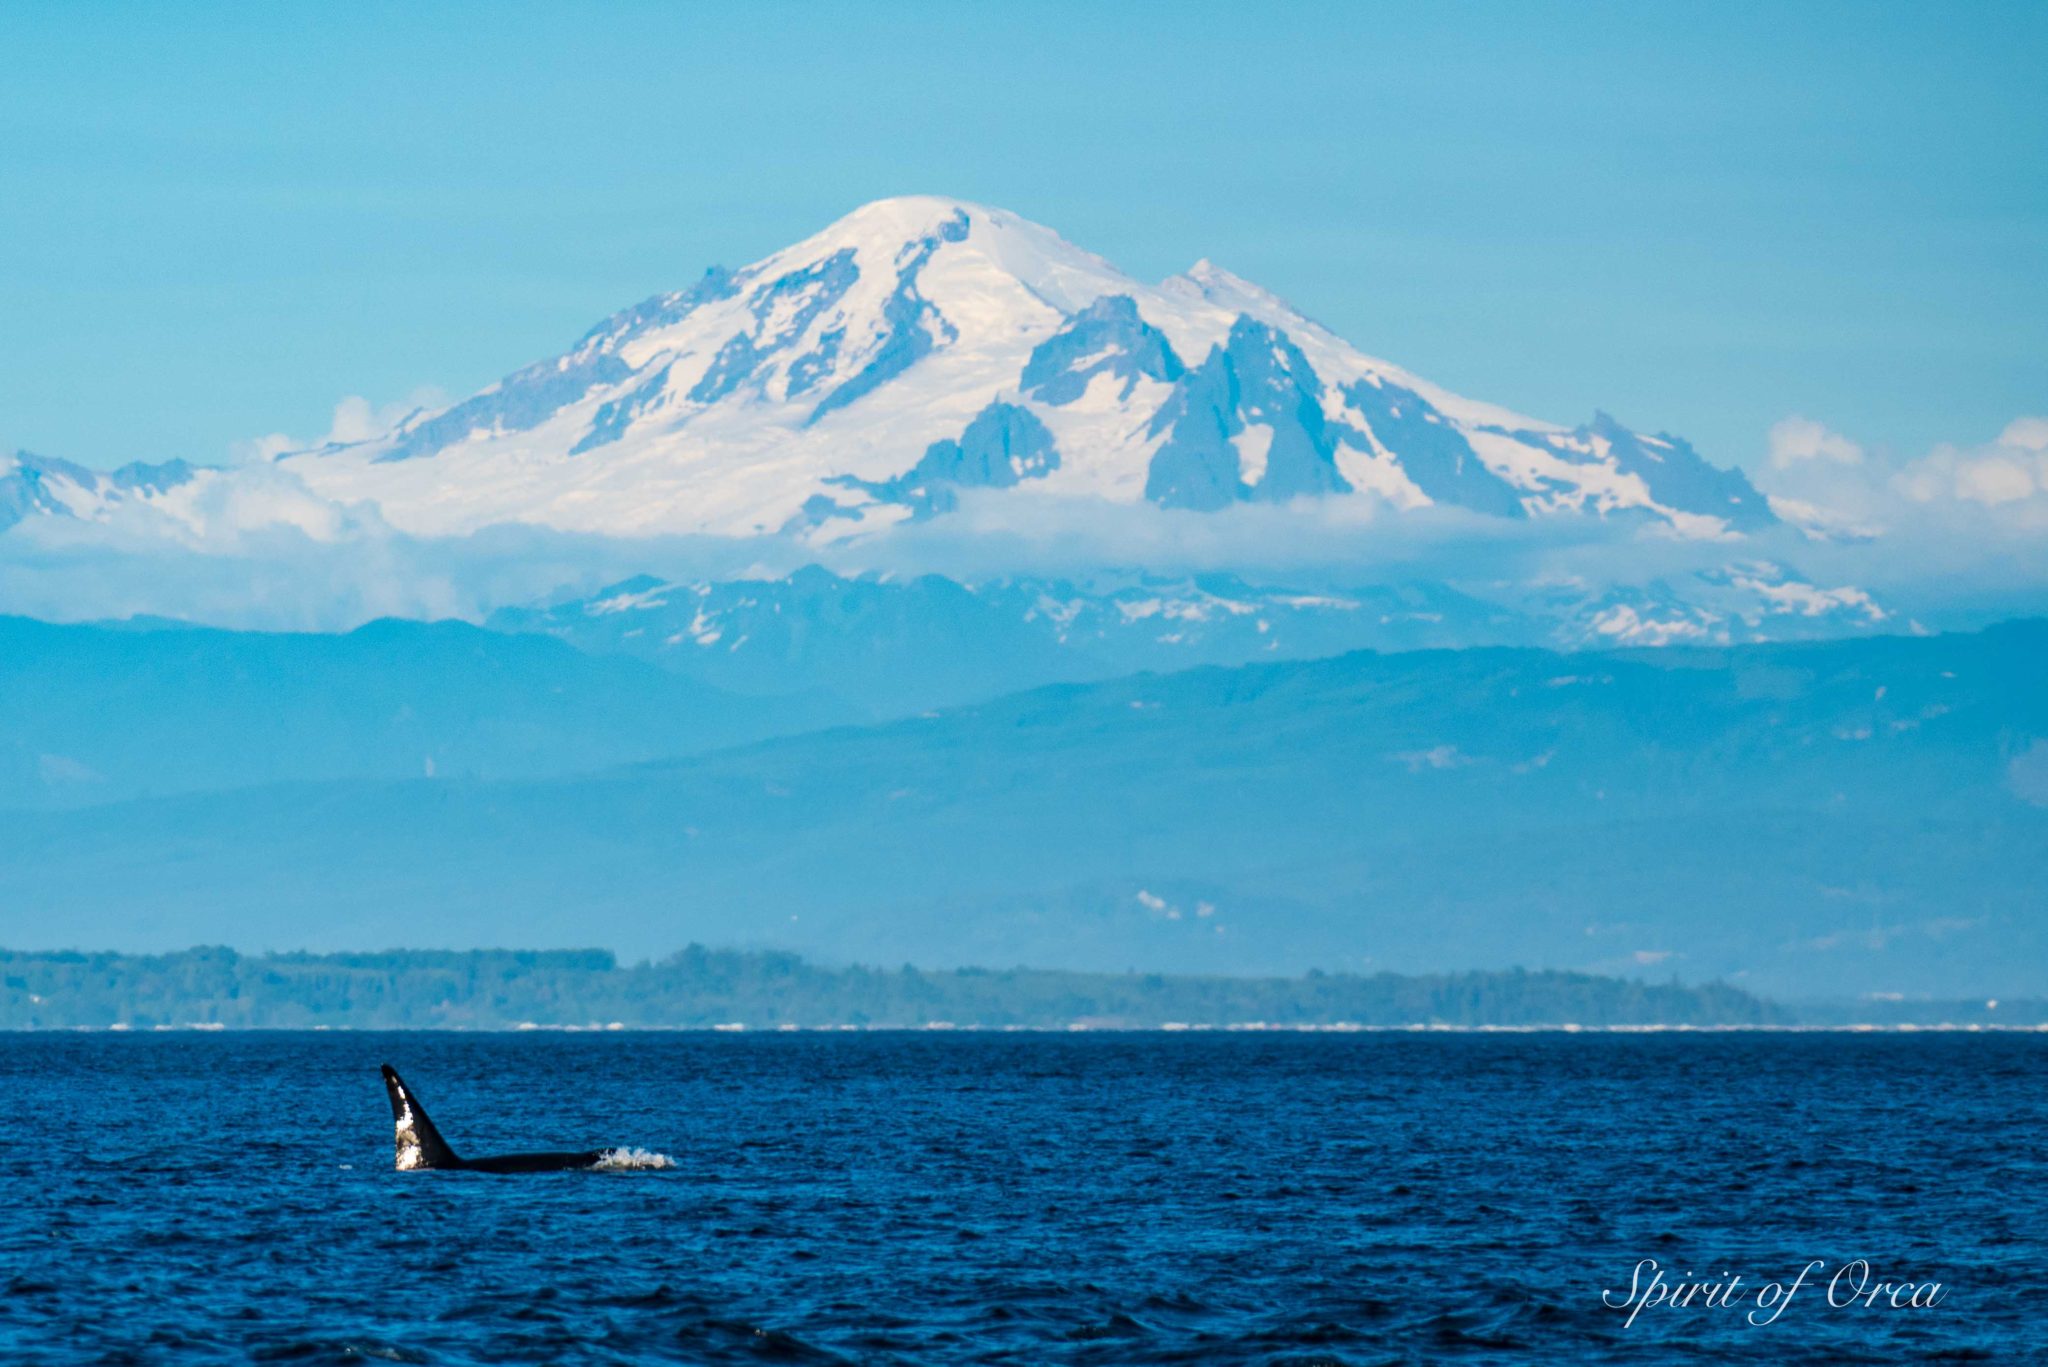 Orca male with mount baker